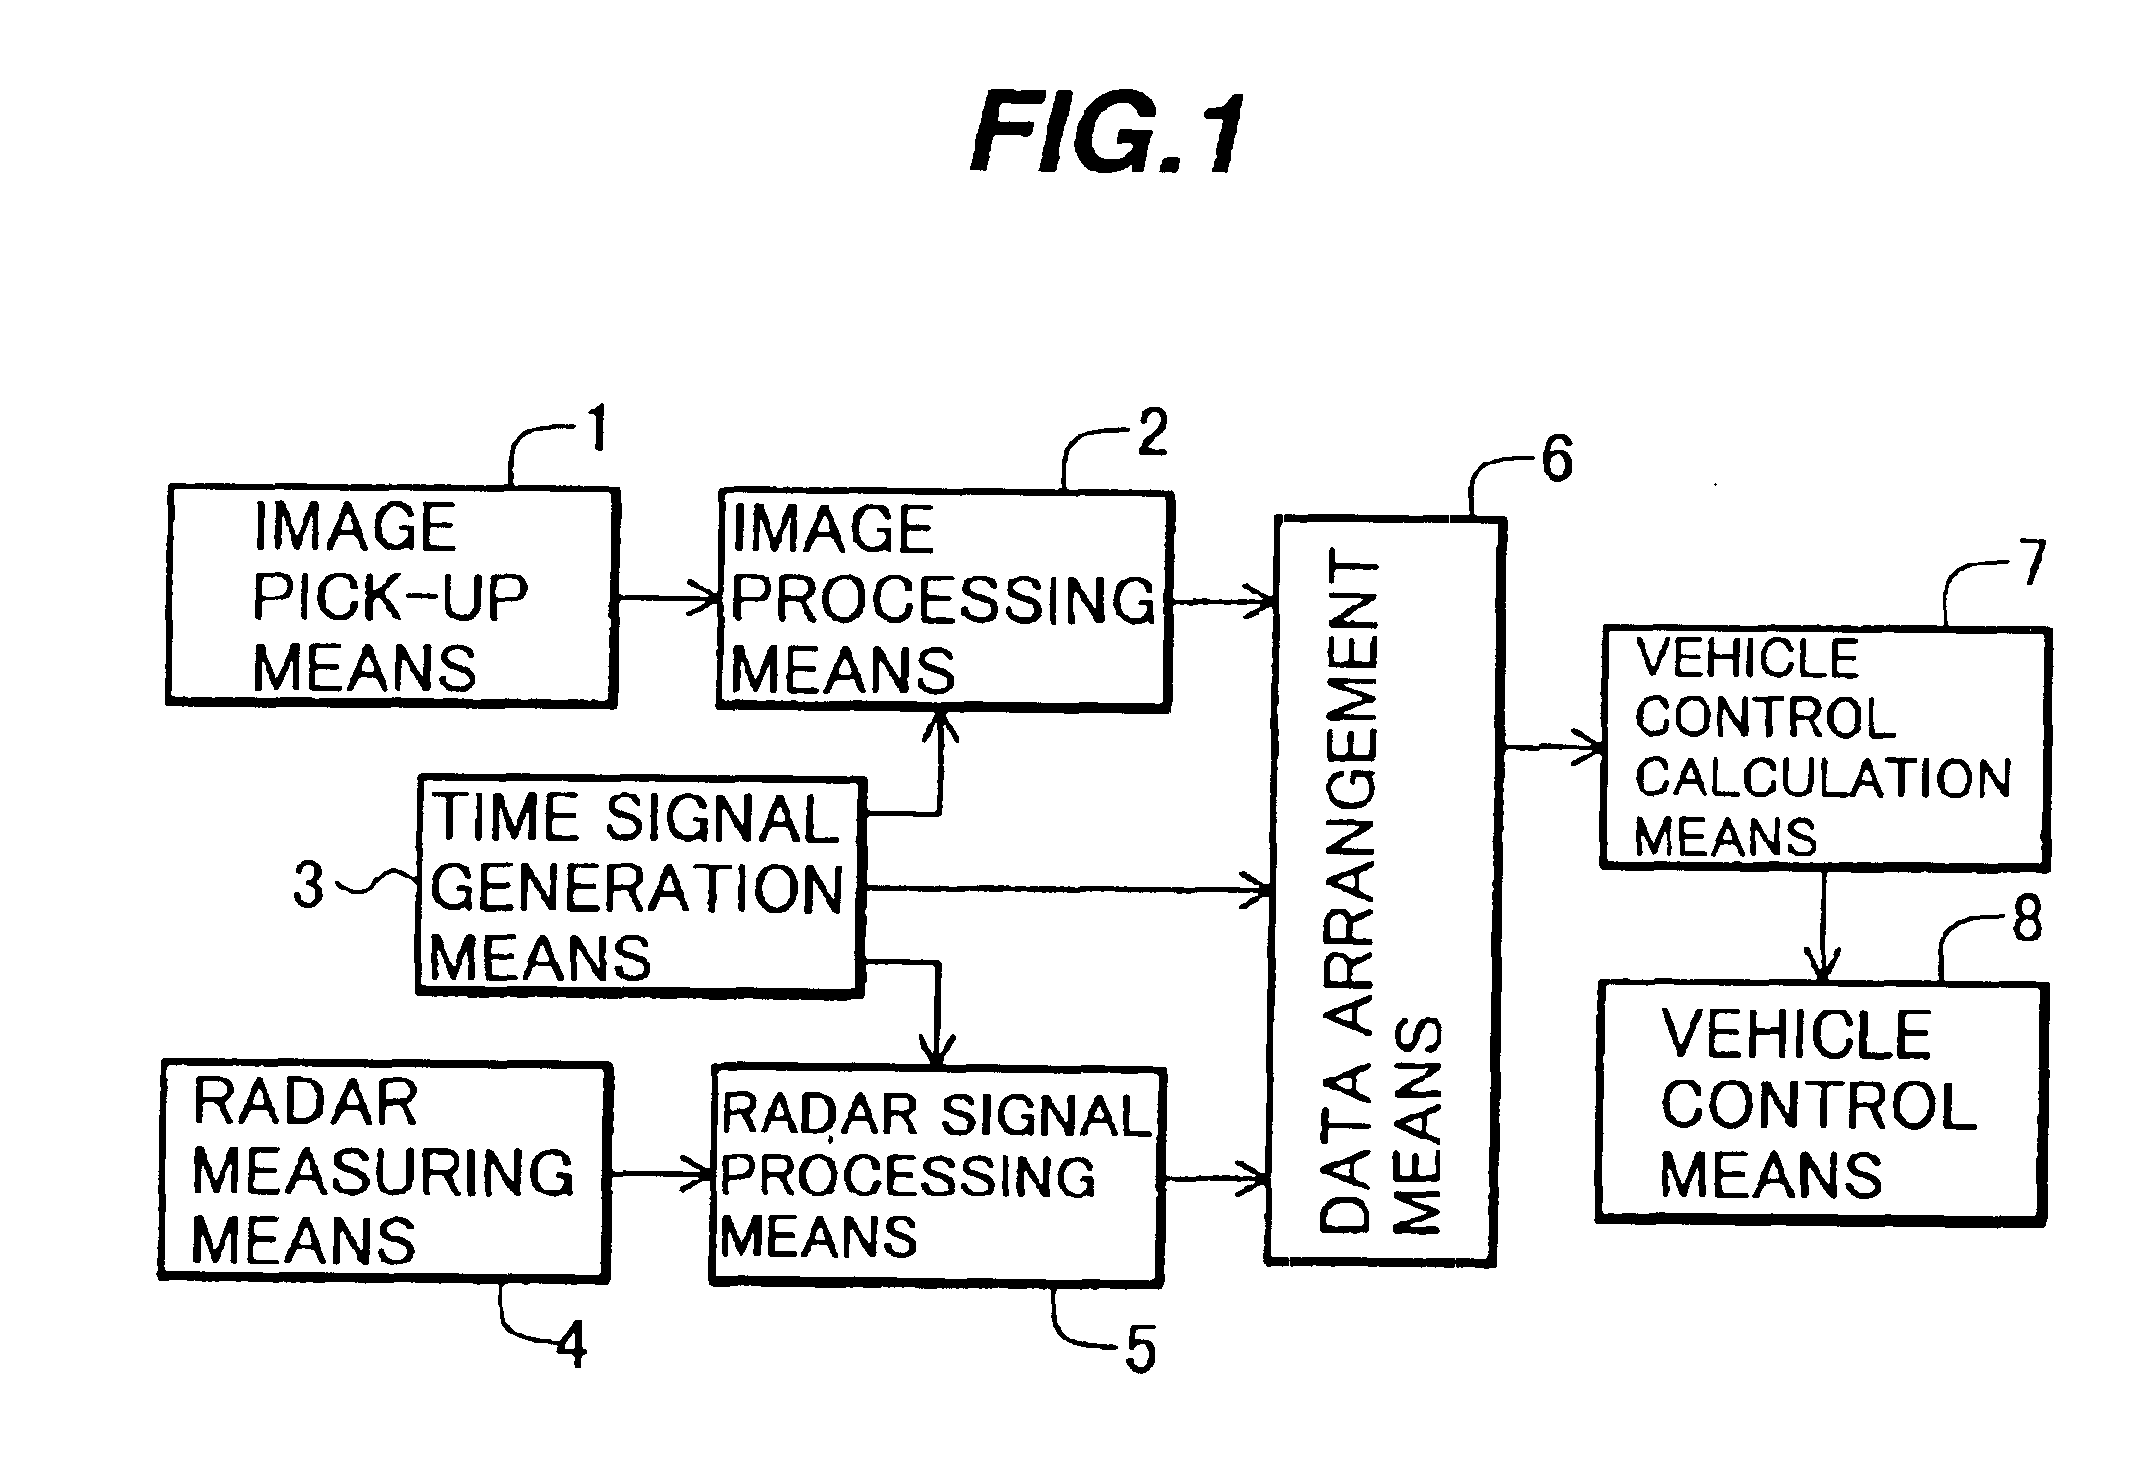 Measurement controller for vehicle